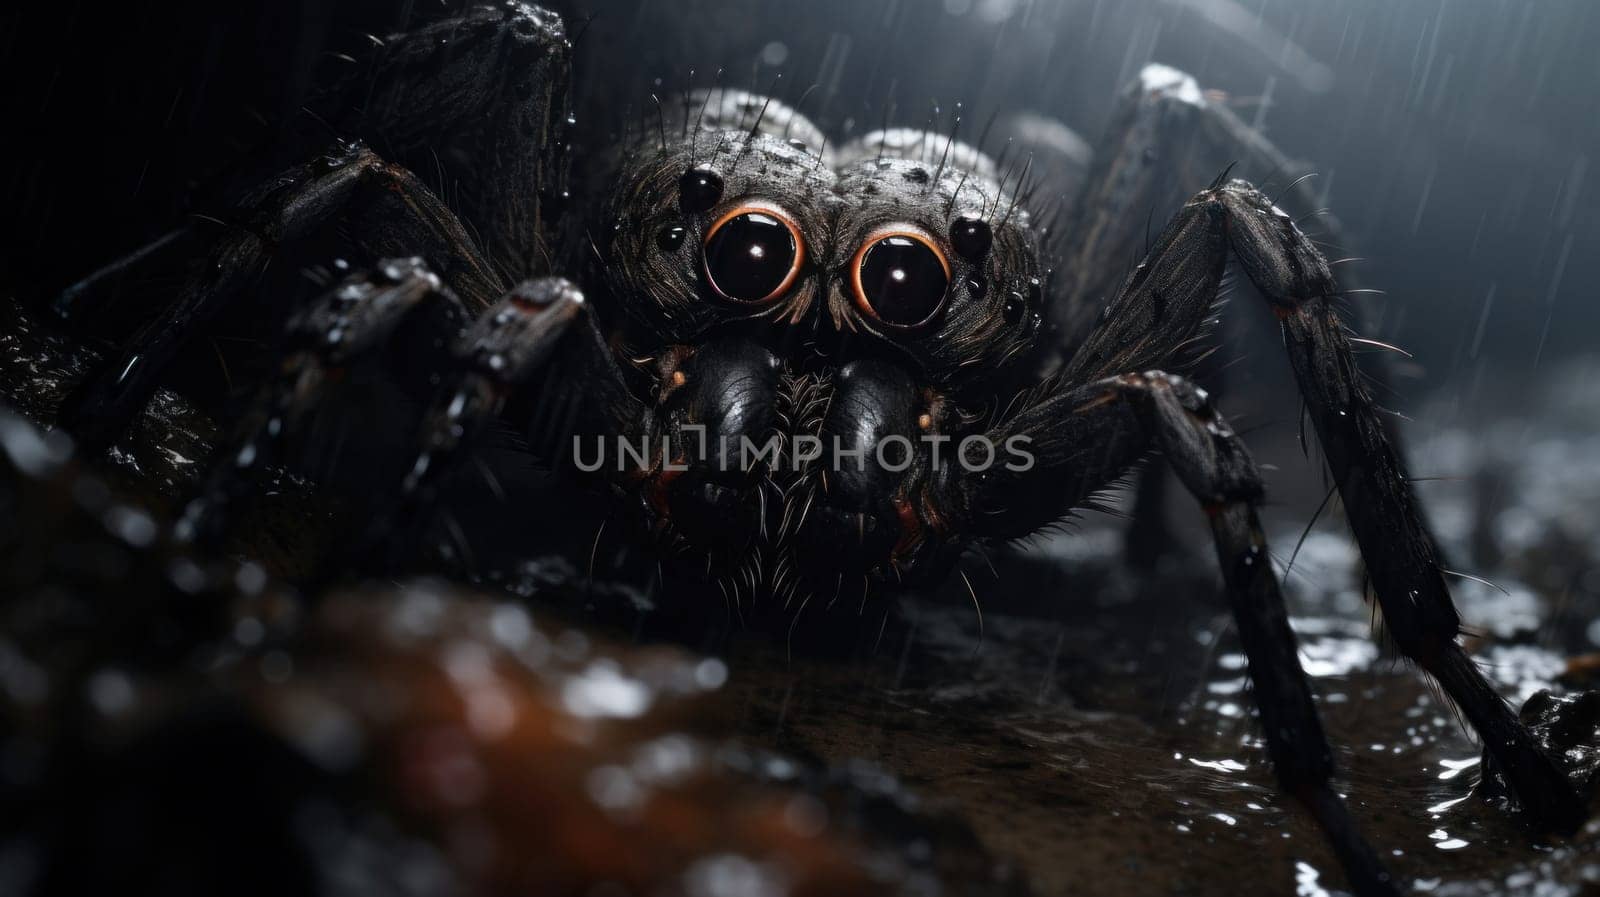 A close up of a spider with big eyes in the rain, AI by starush